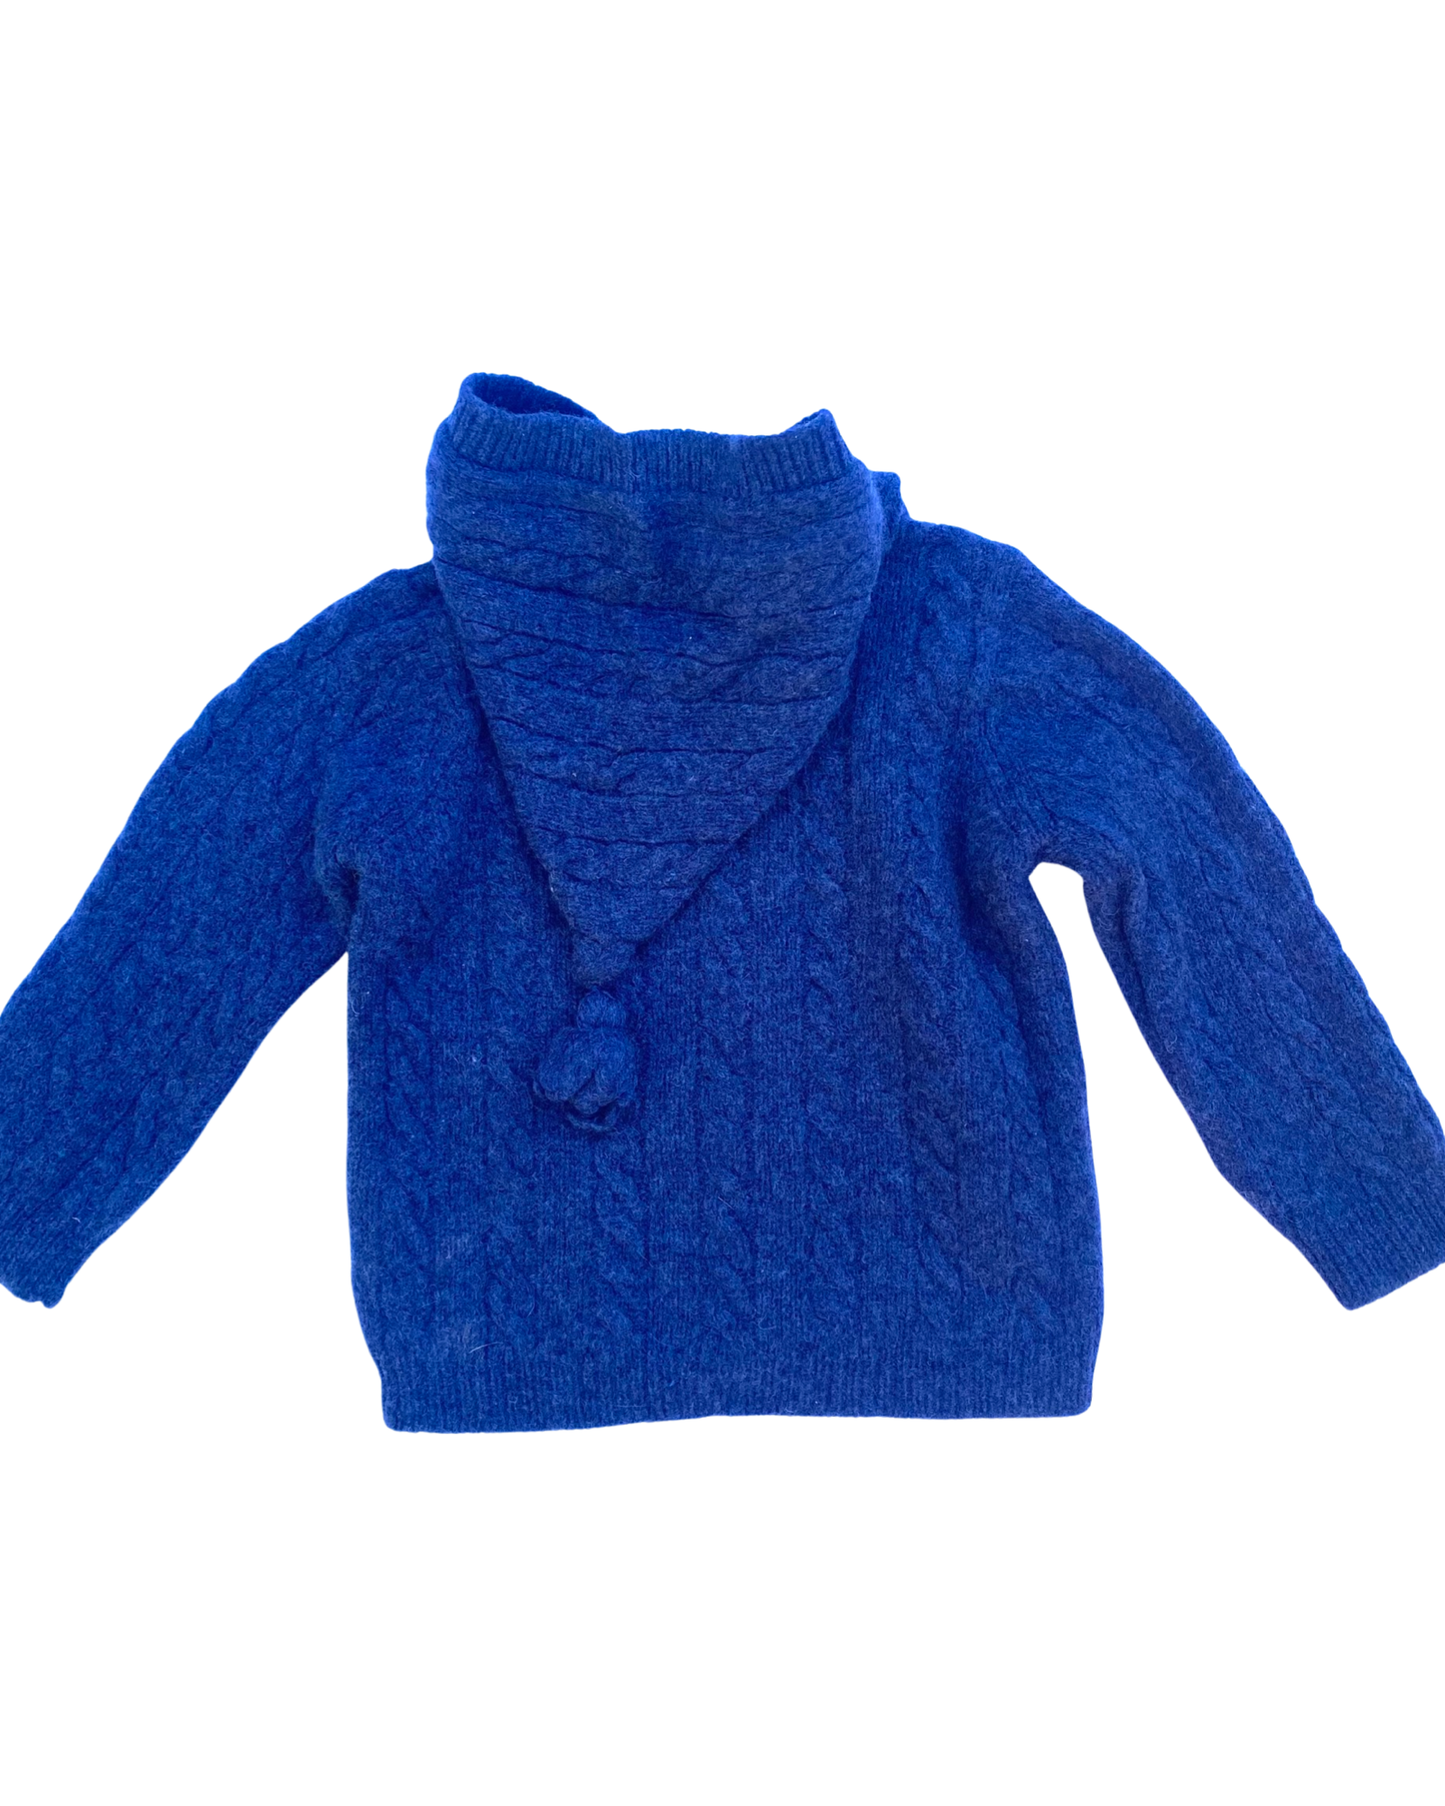 JoJo Maman Bebe blue hooded cable knit cardigan (size 6-12mths)